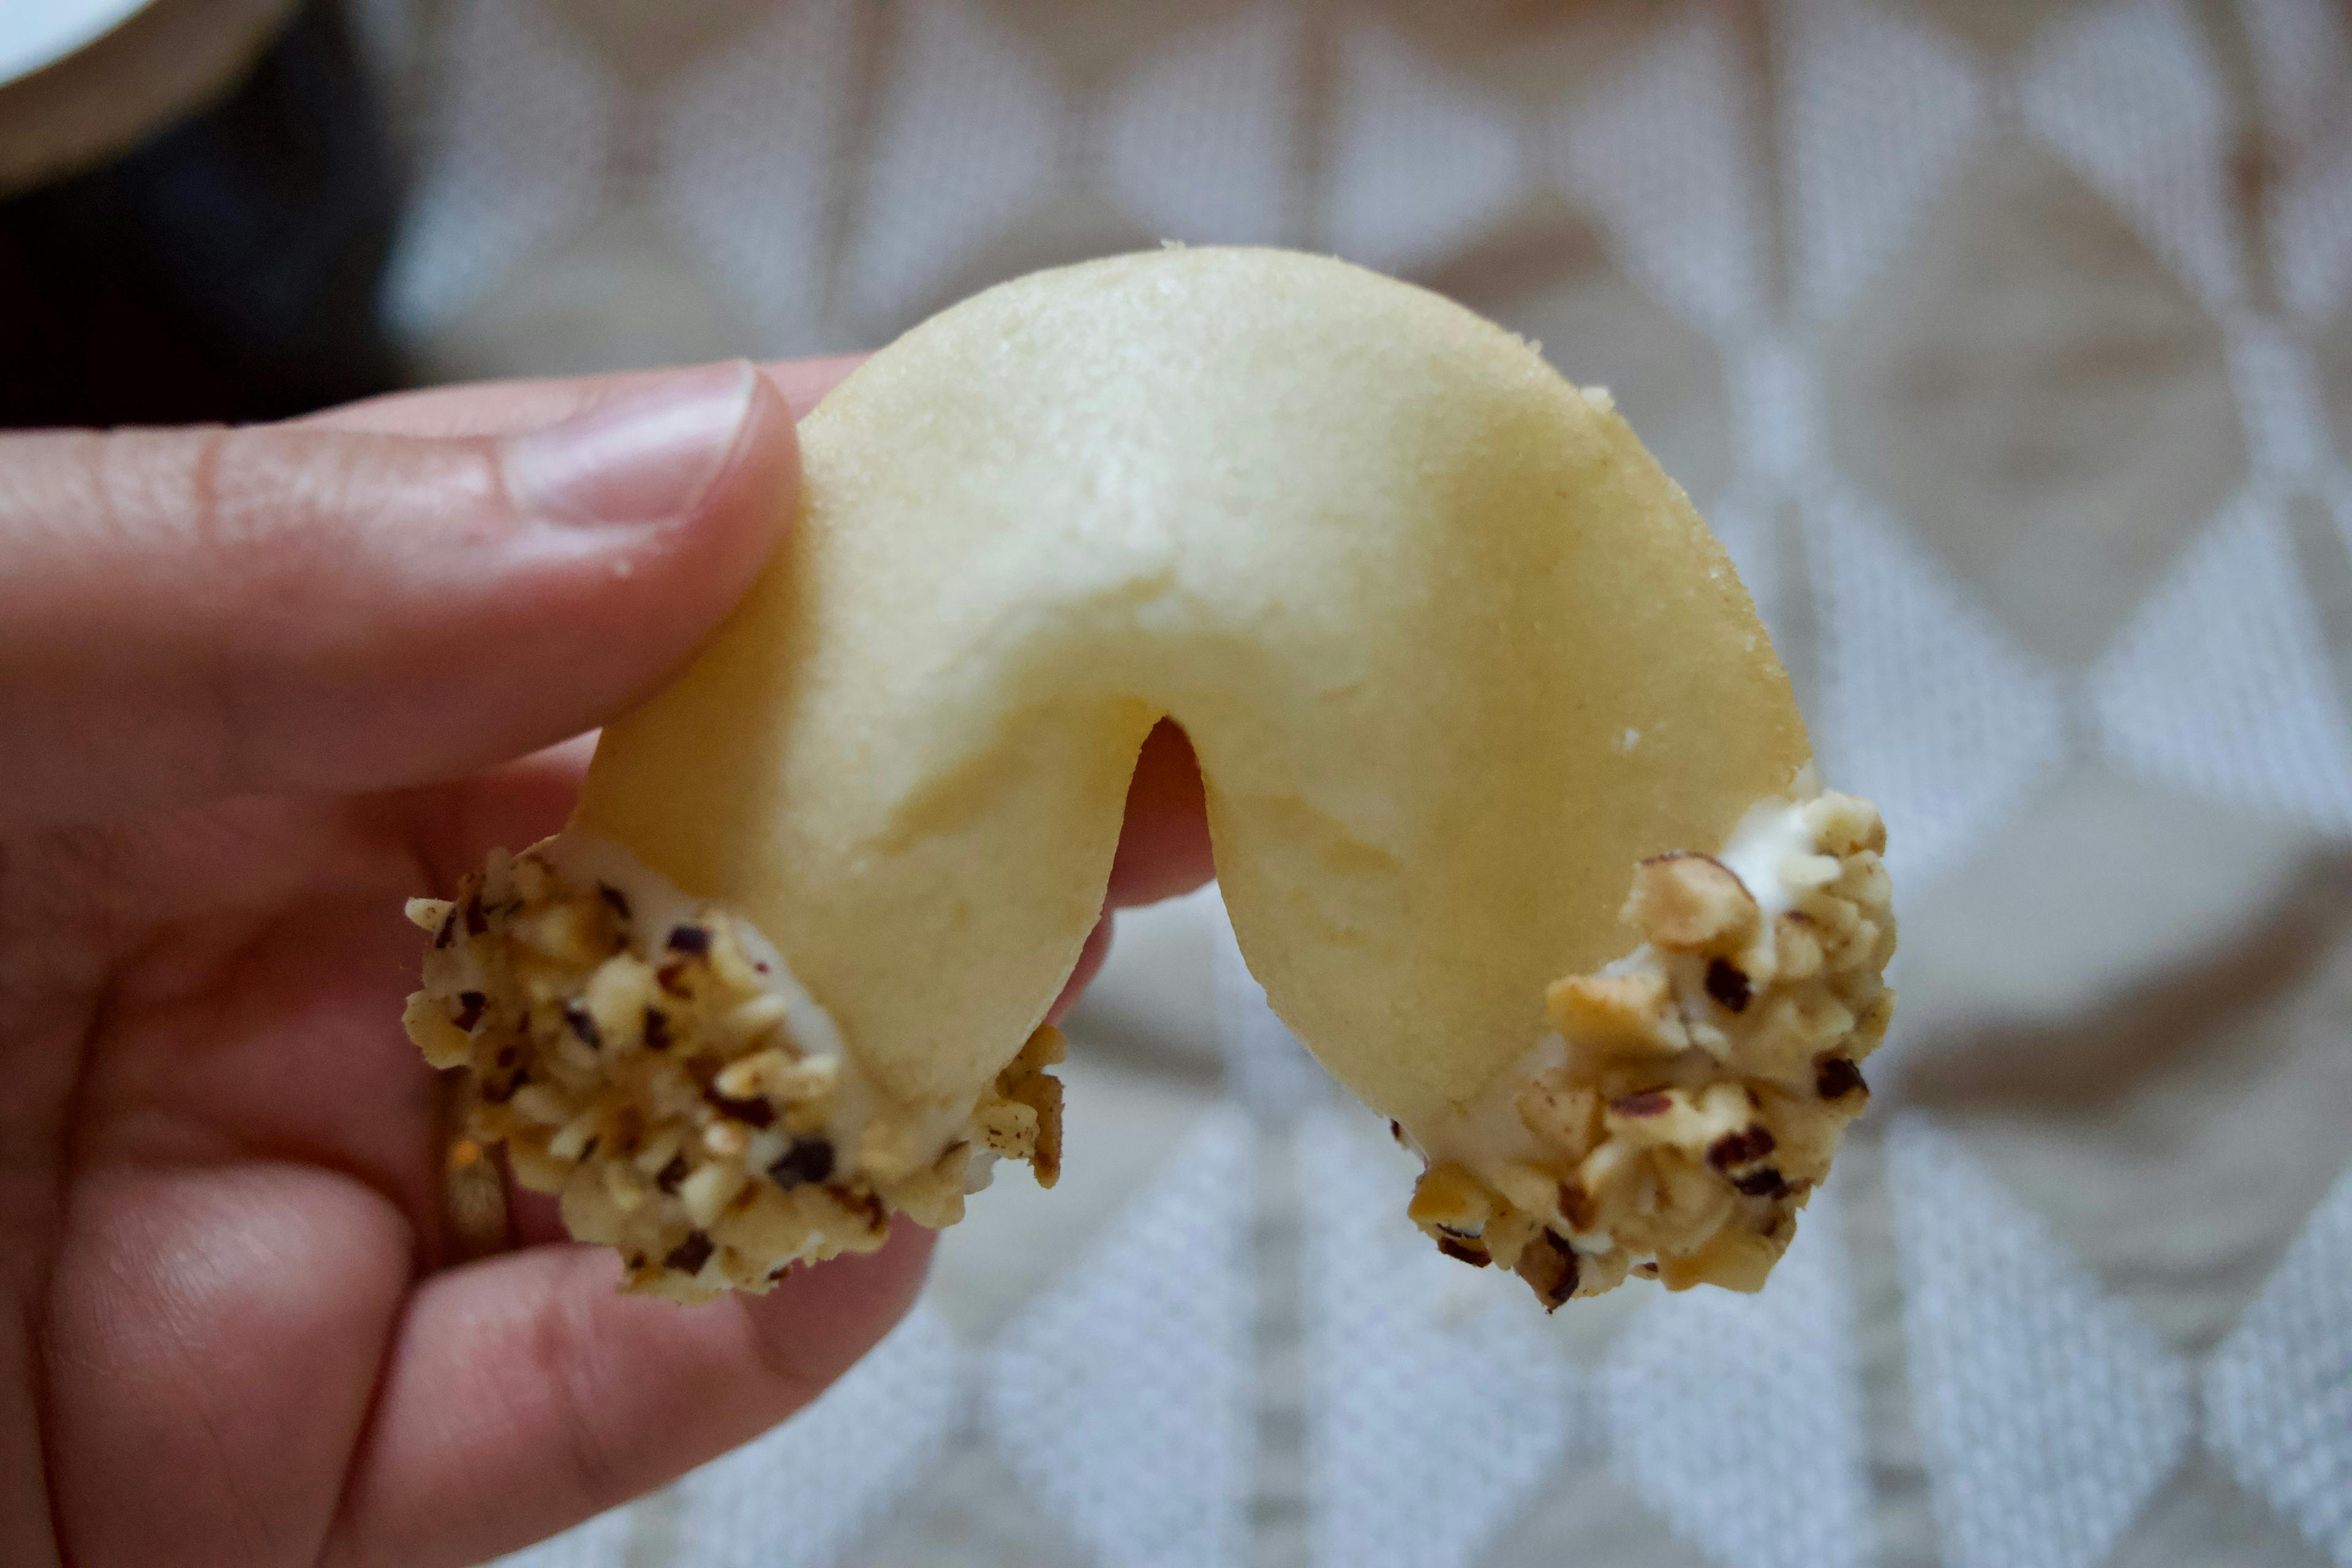 An almond fortune cookie